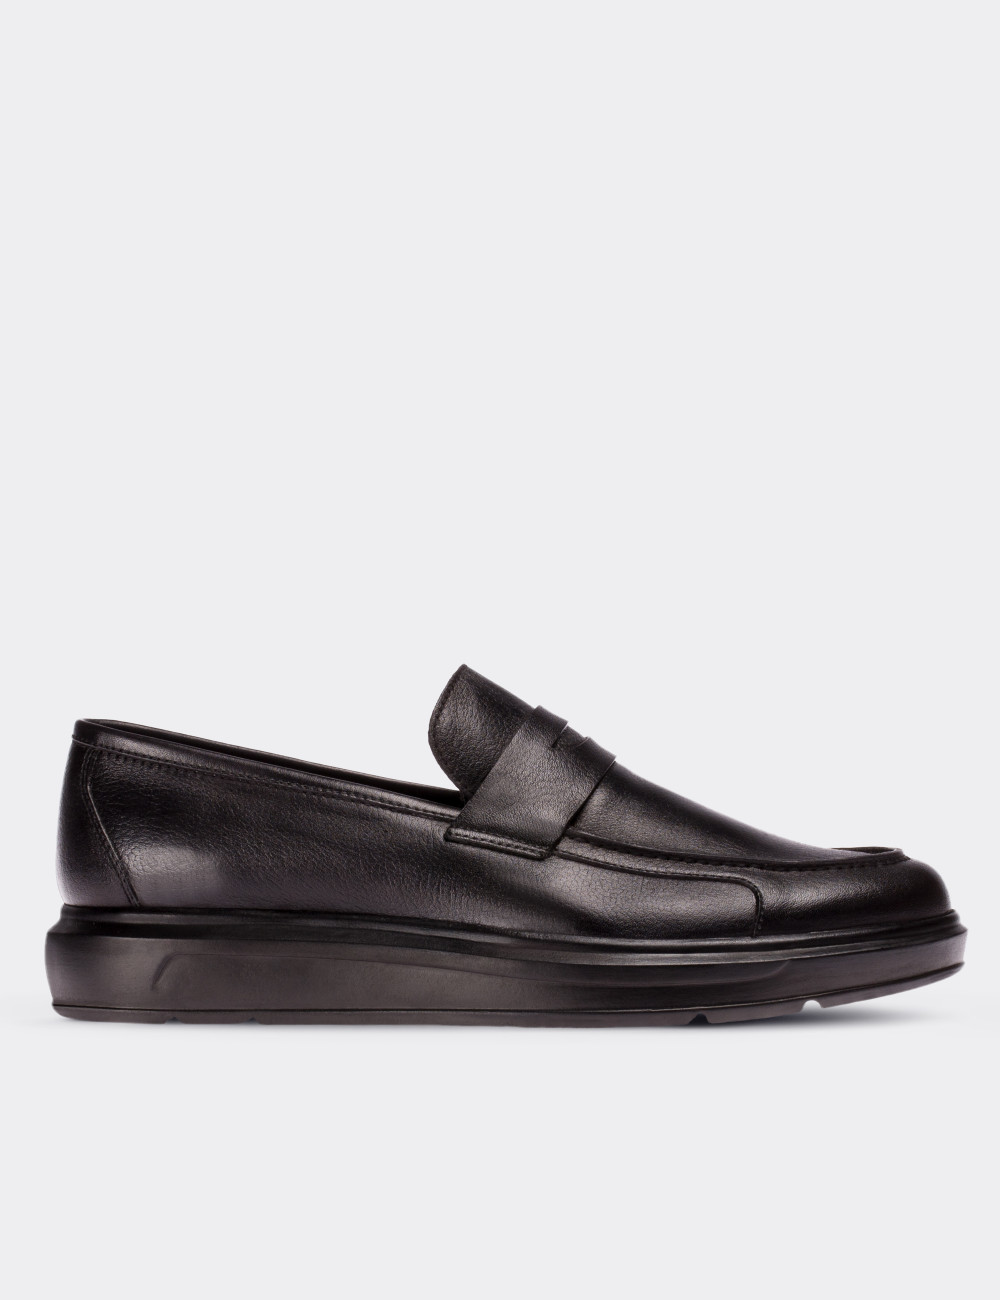 Black  Leather Loafers & Moccasins Shoes - 01564MSYHP05